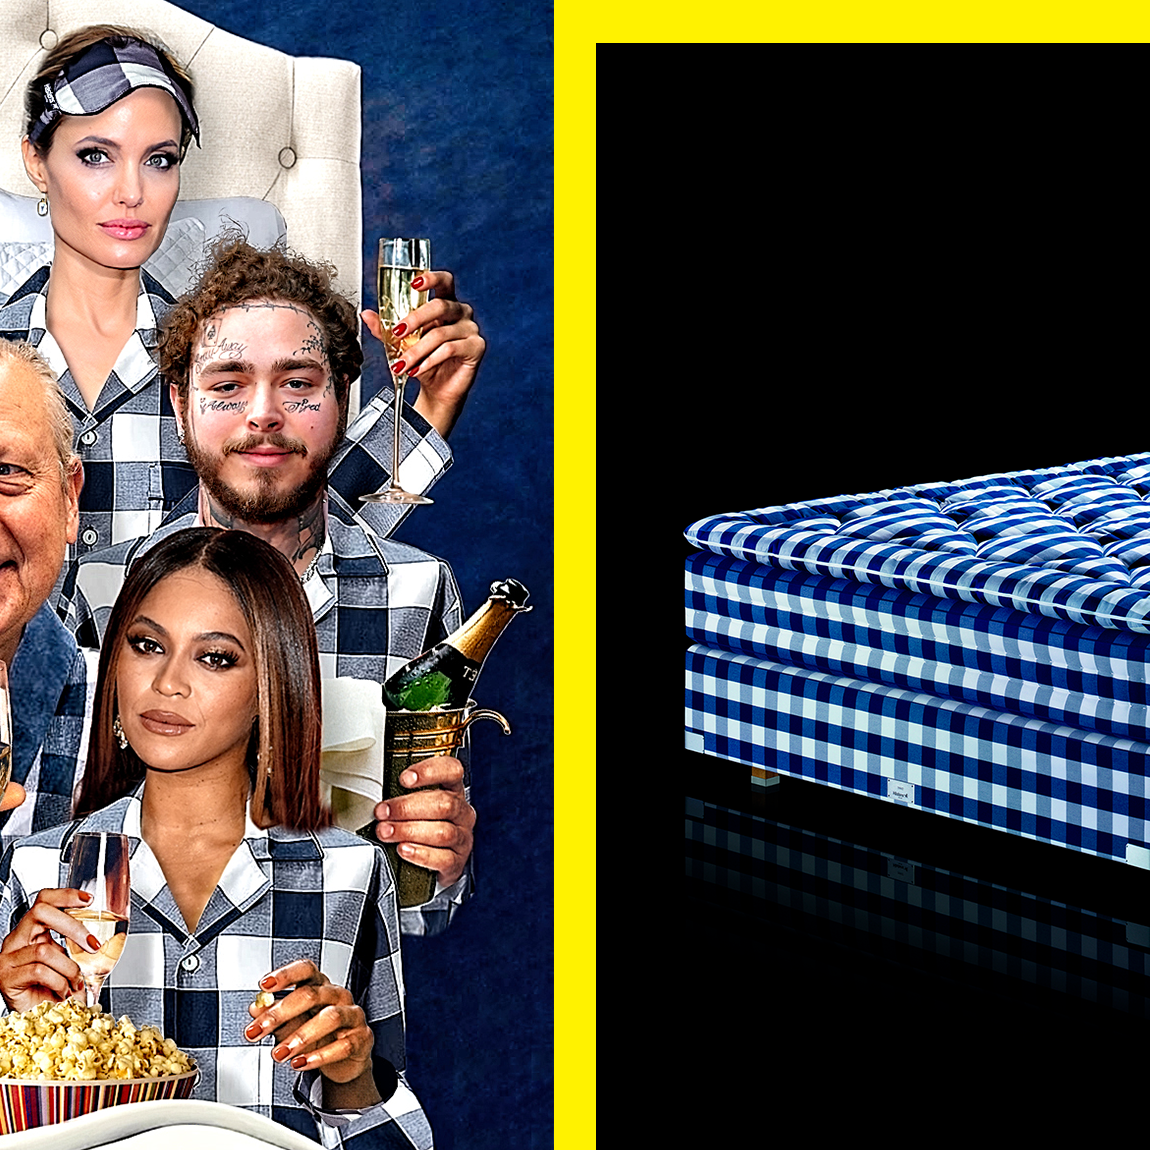 Want the Best Sleep of Your Life? This $80K Mattress May Be the Answer.